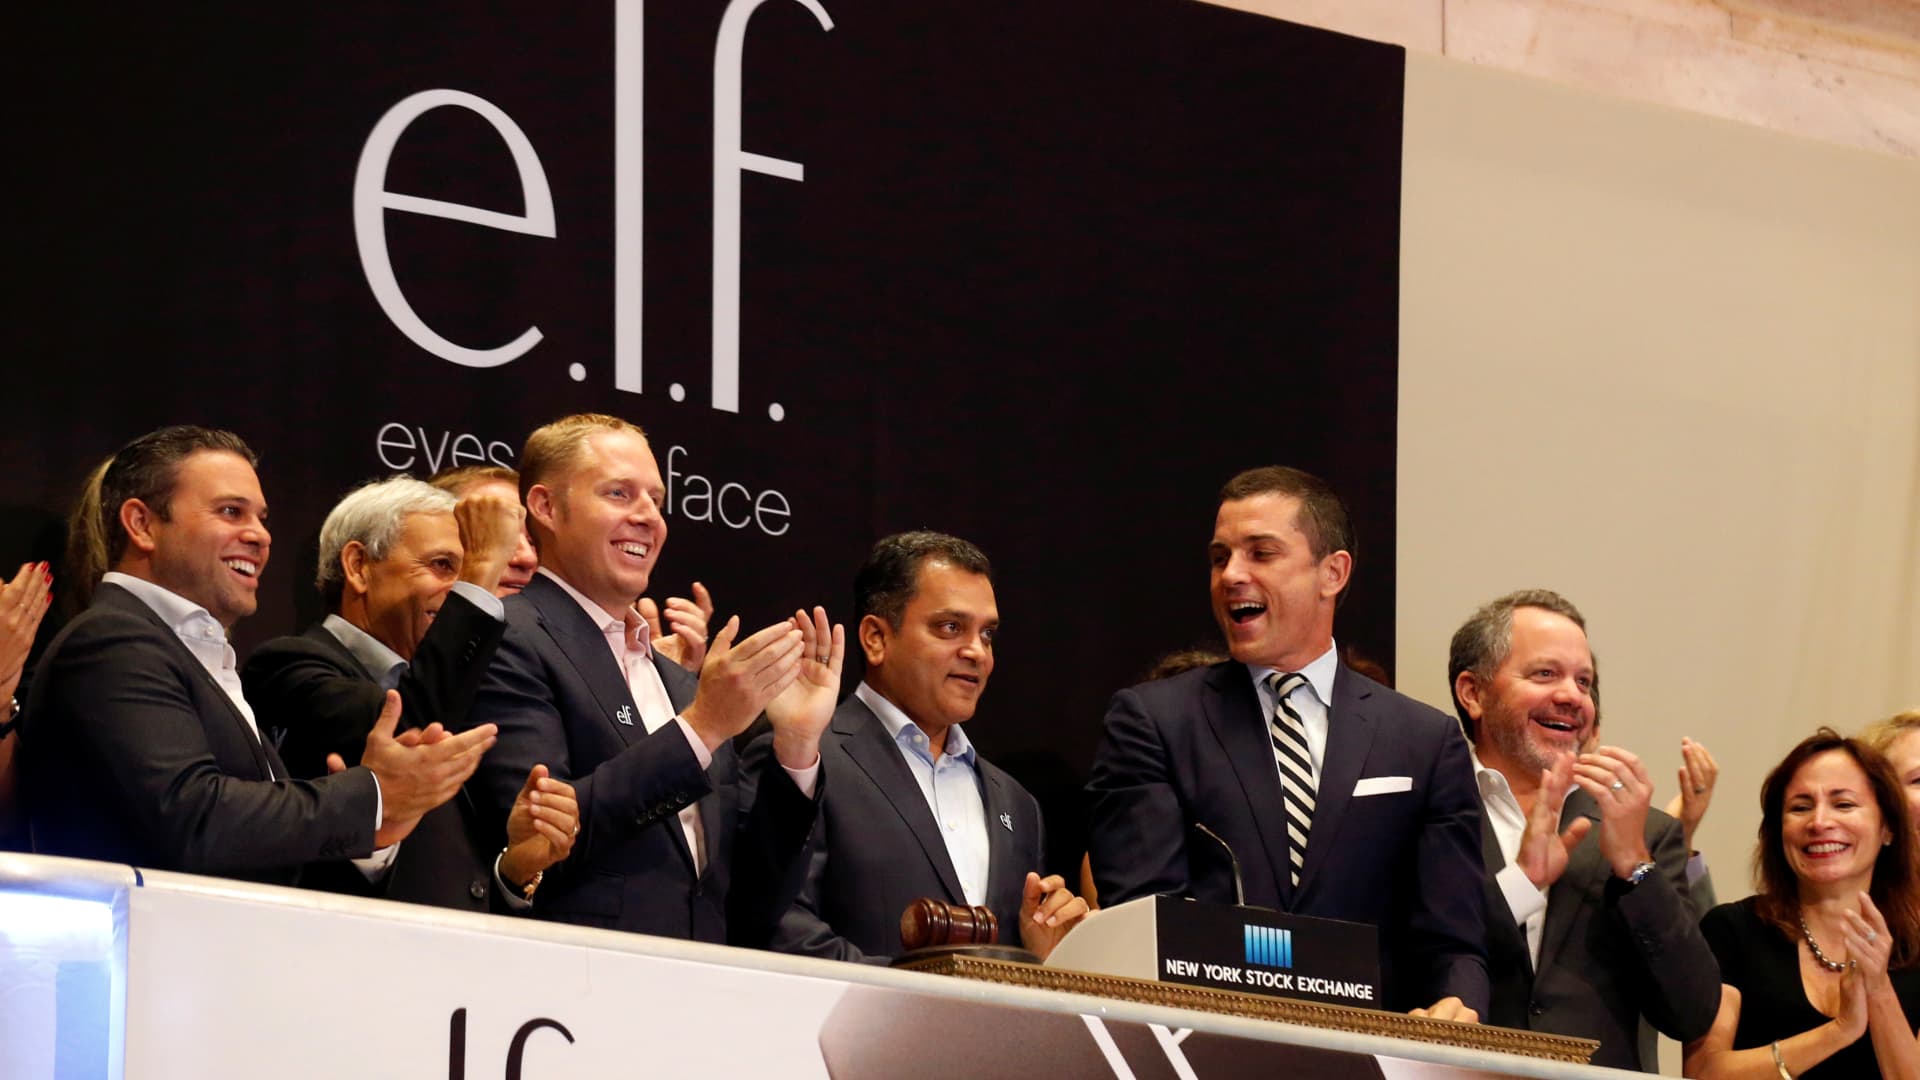 Shares of e.l.f. Beauty jump 15% after company raises full-year guidance on surging sales